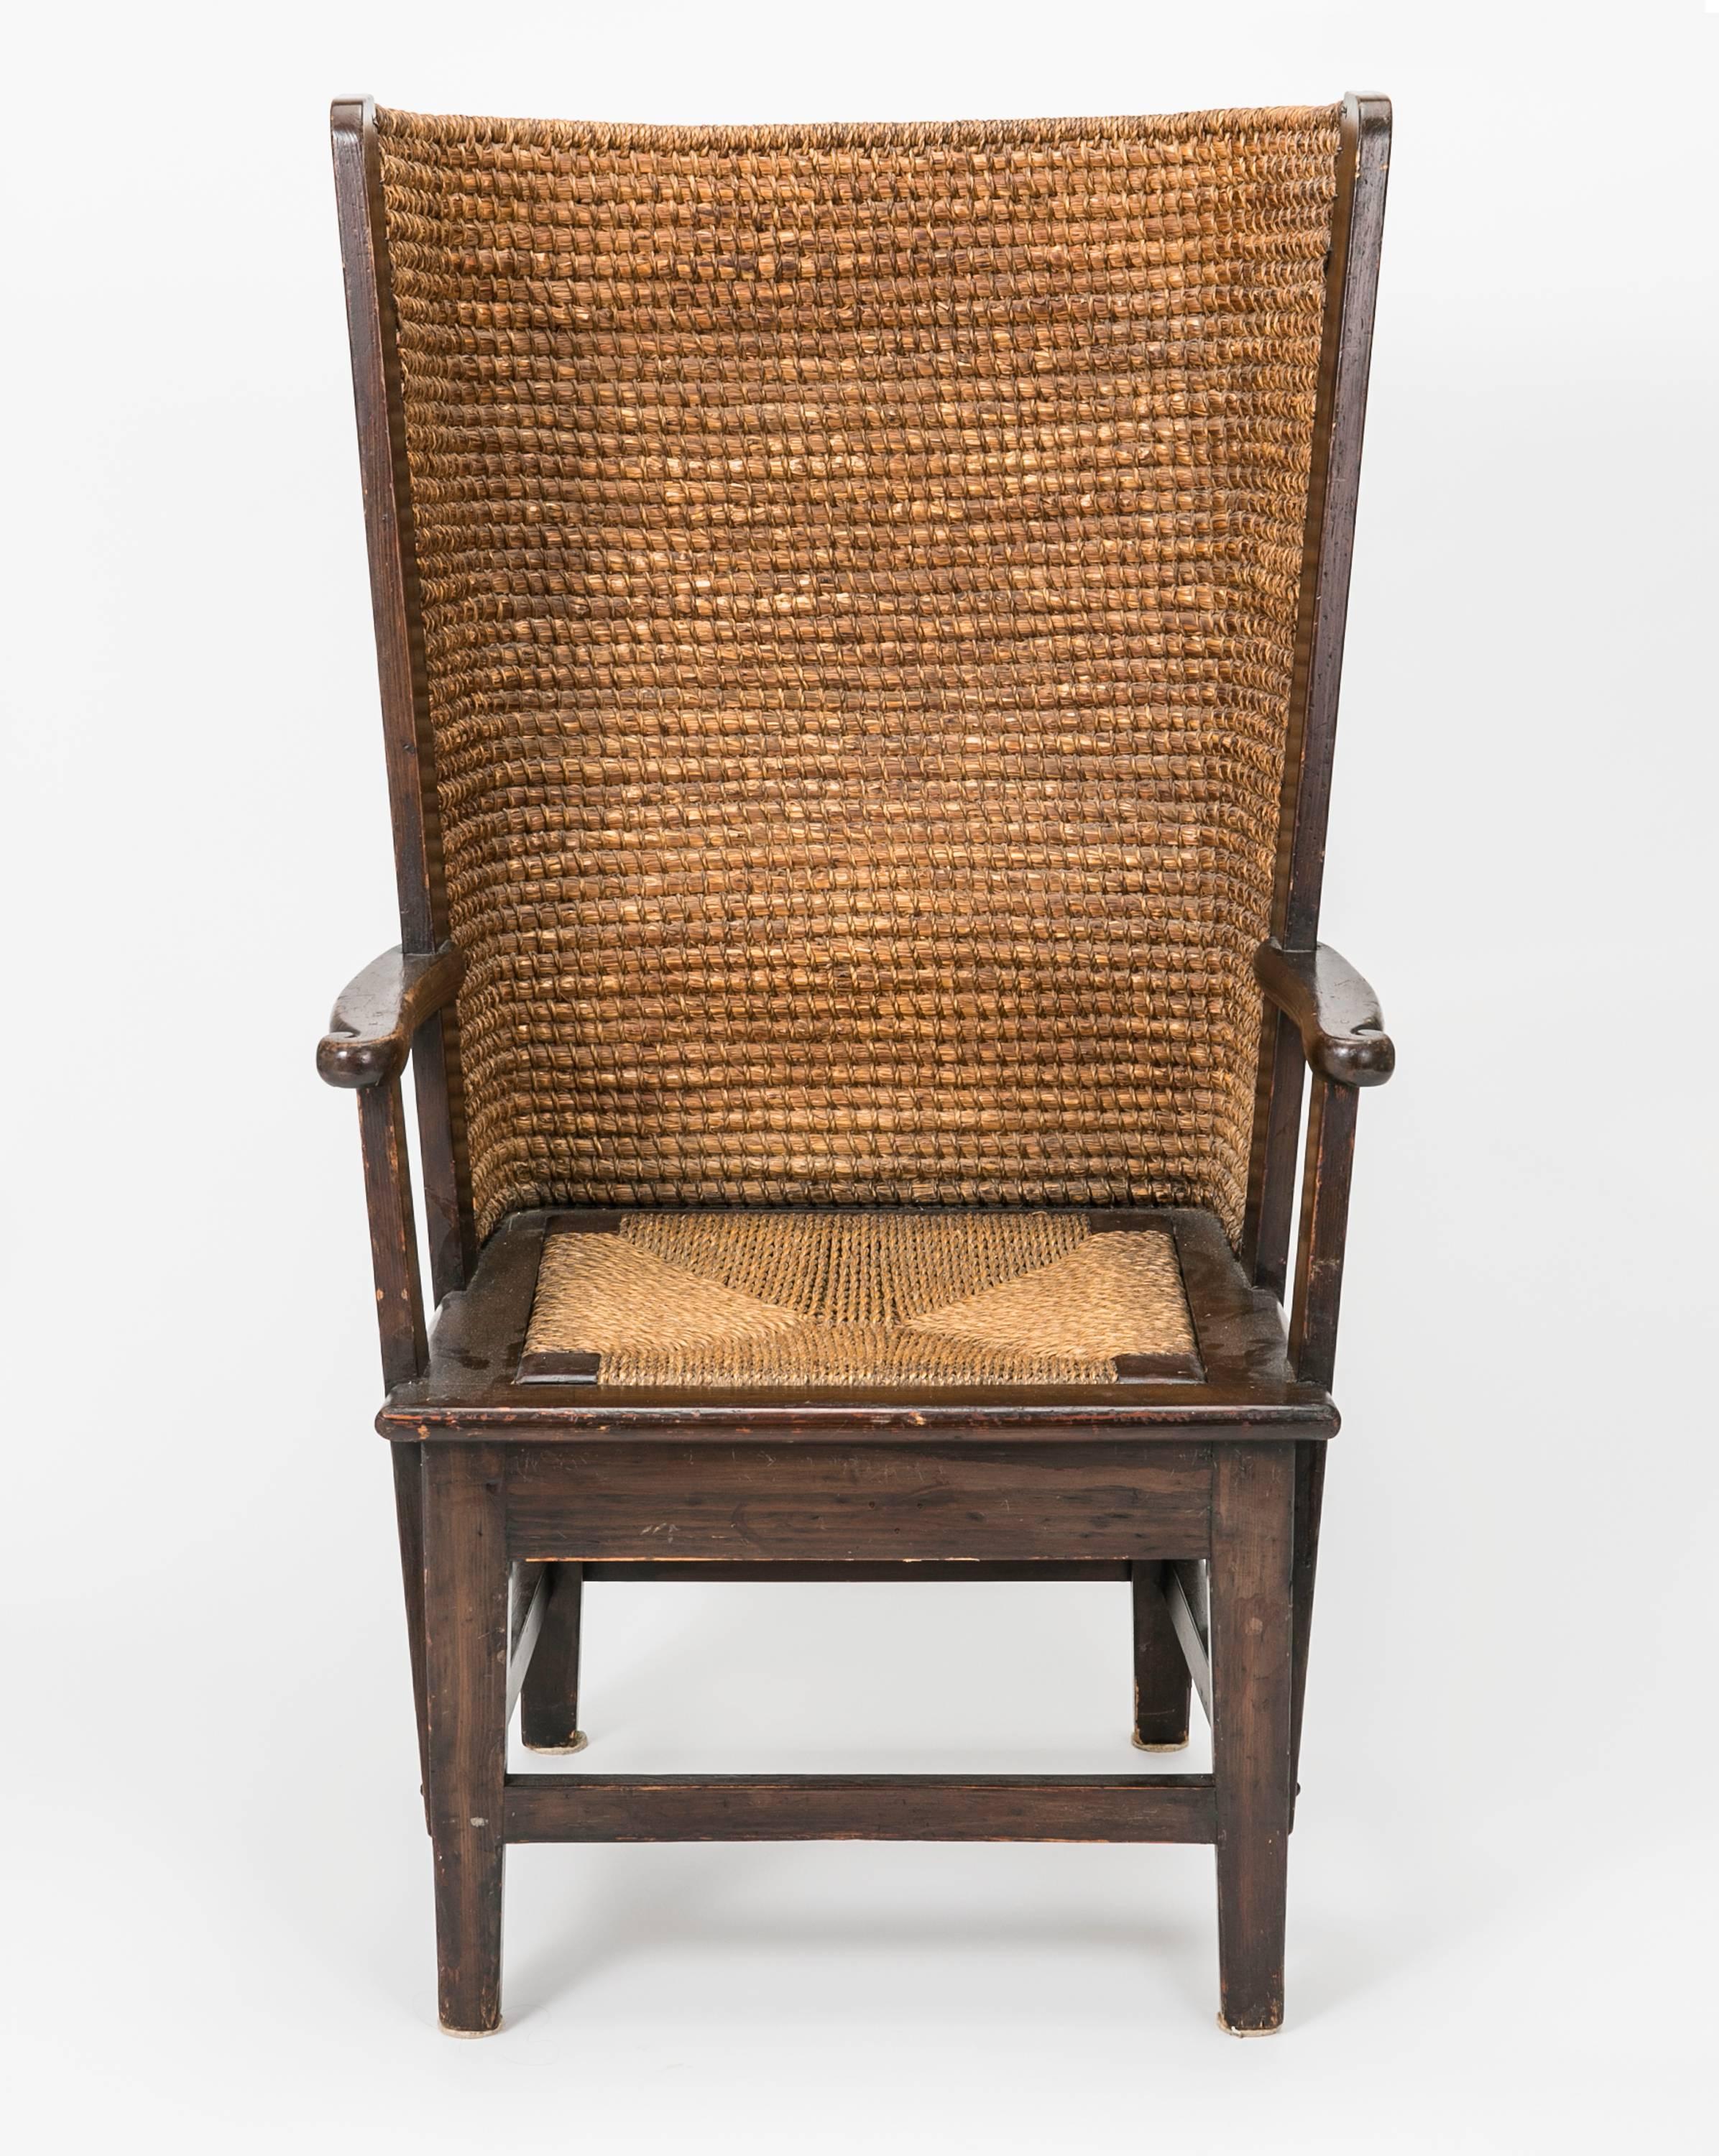 Scottish Orkney rush chair, circa 1920. Very charming barrel shape in handwoven grass rush, framed in carved oakwood. Seat is also rush. Seat cushion would make it very comfortable.